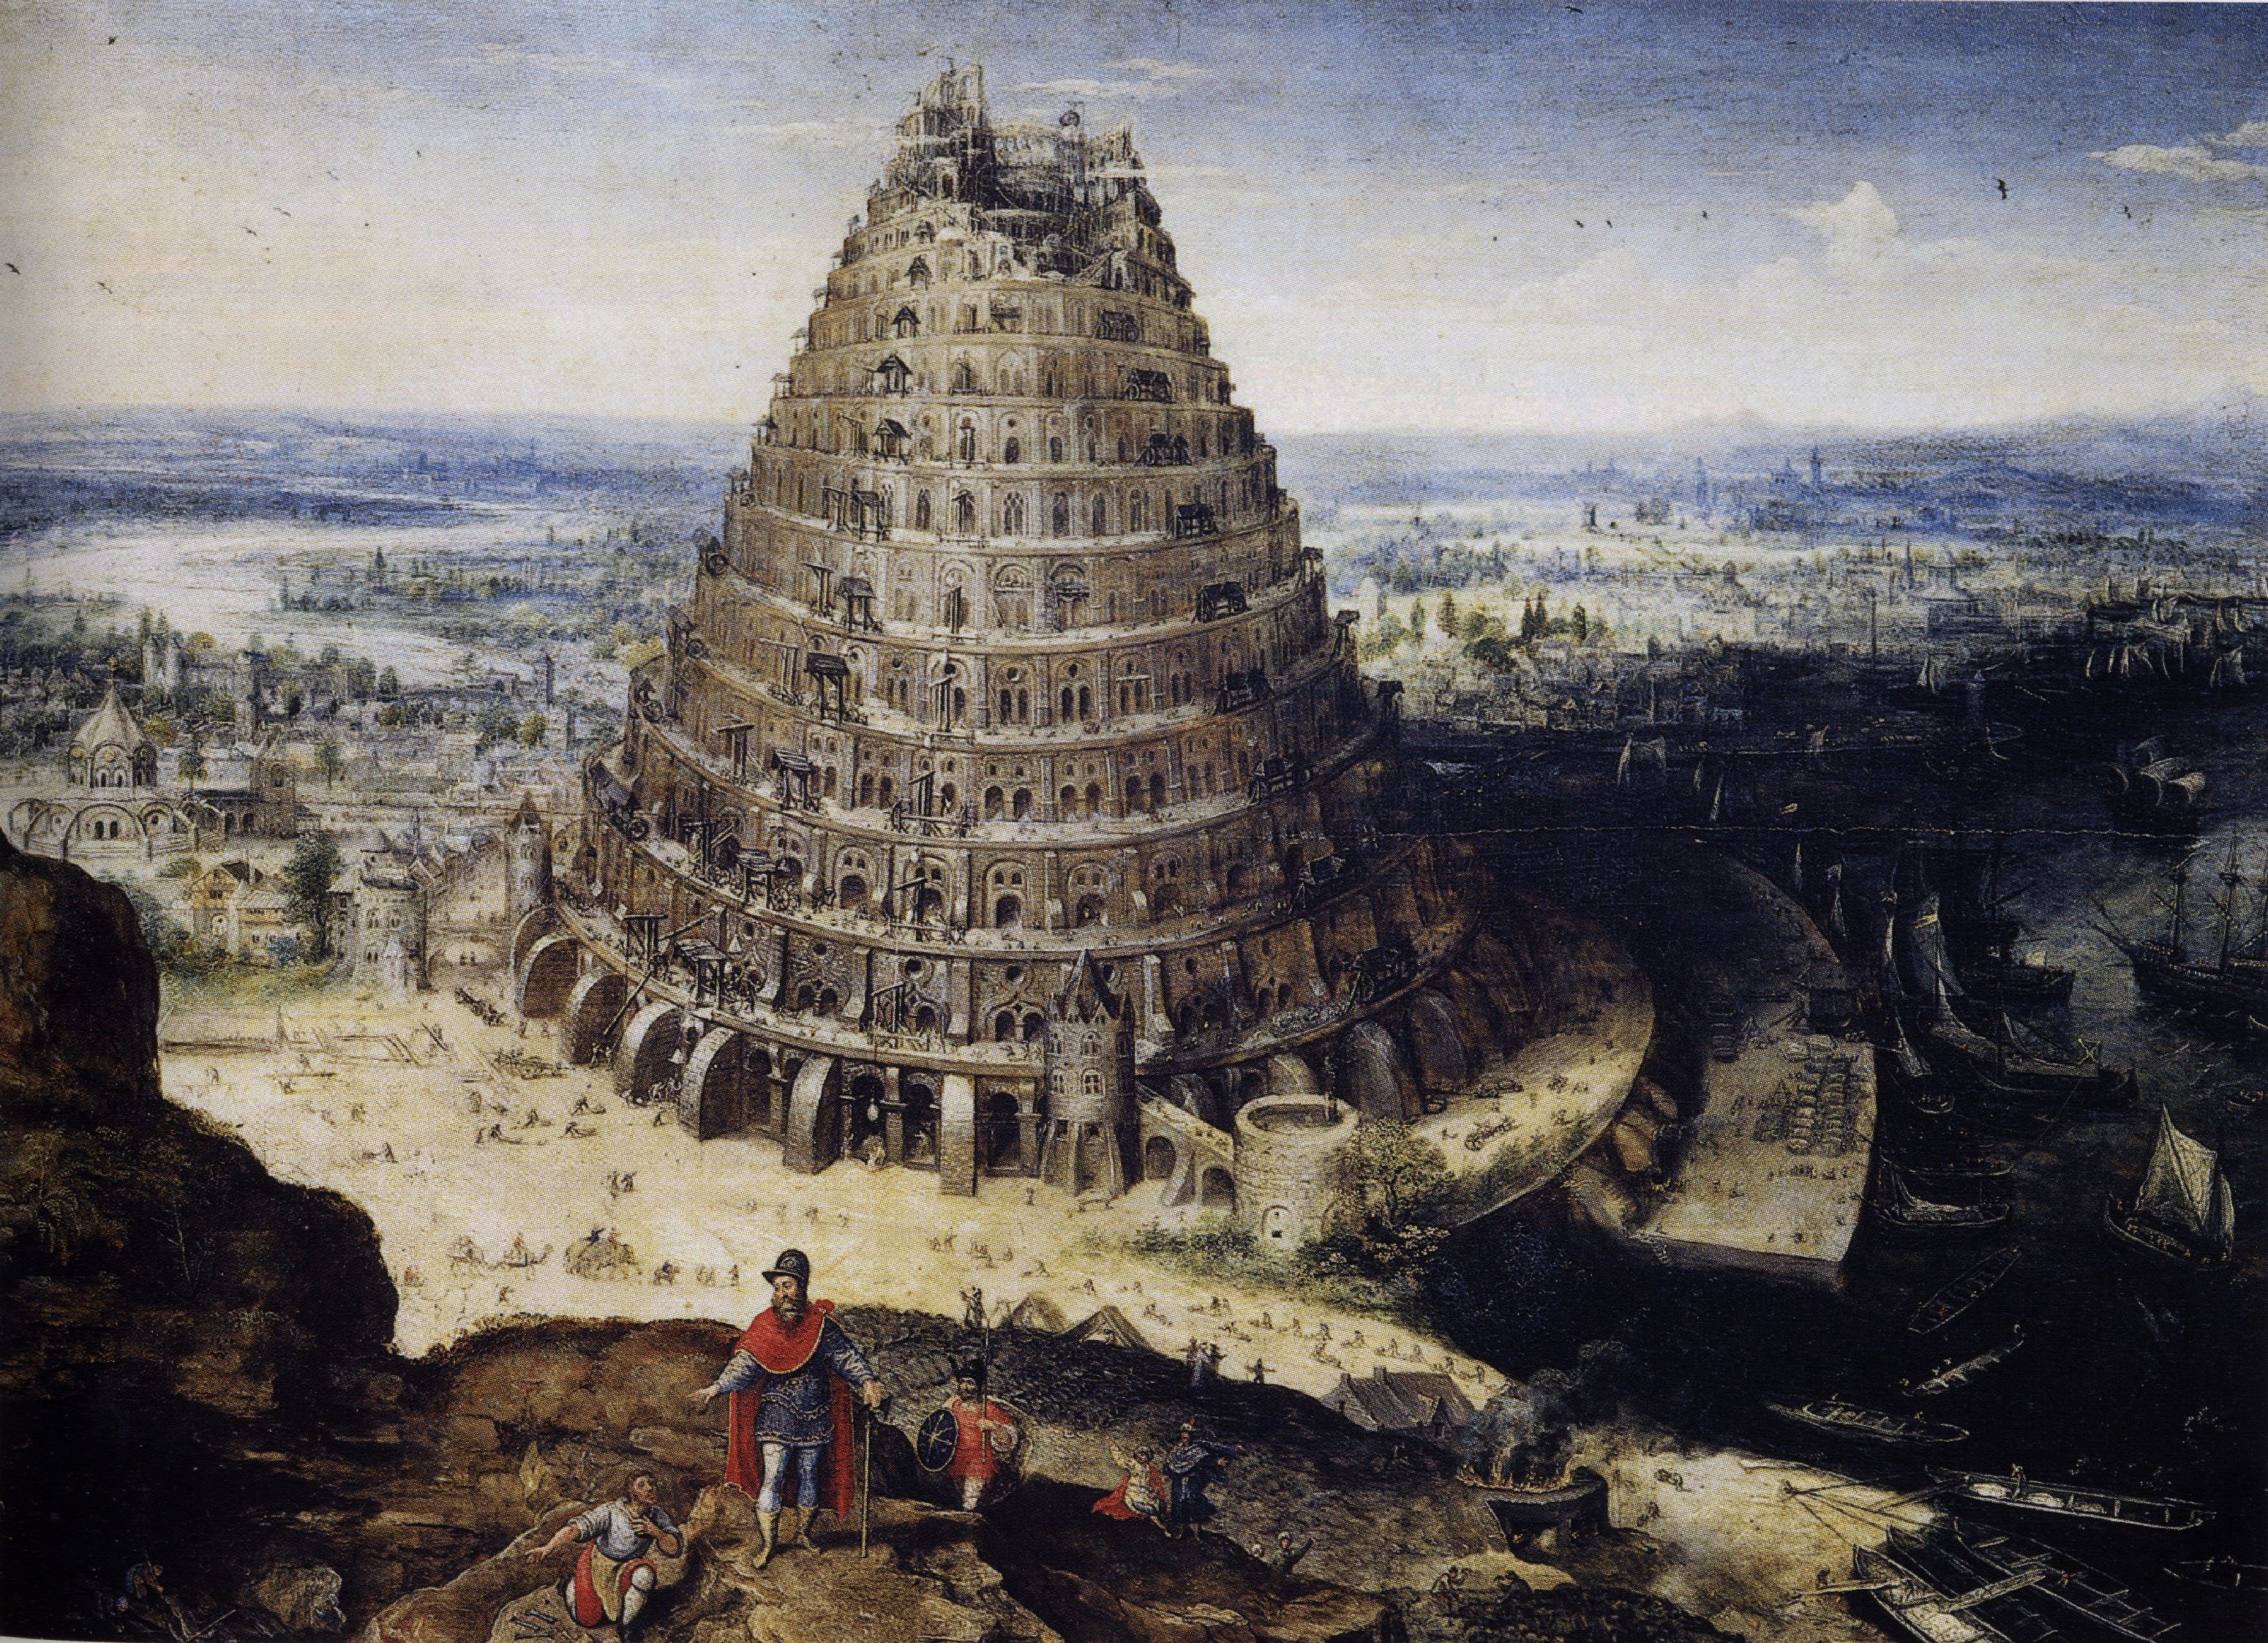 Tower of Babel - Wikipedia